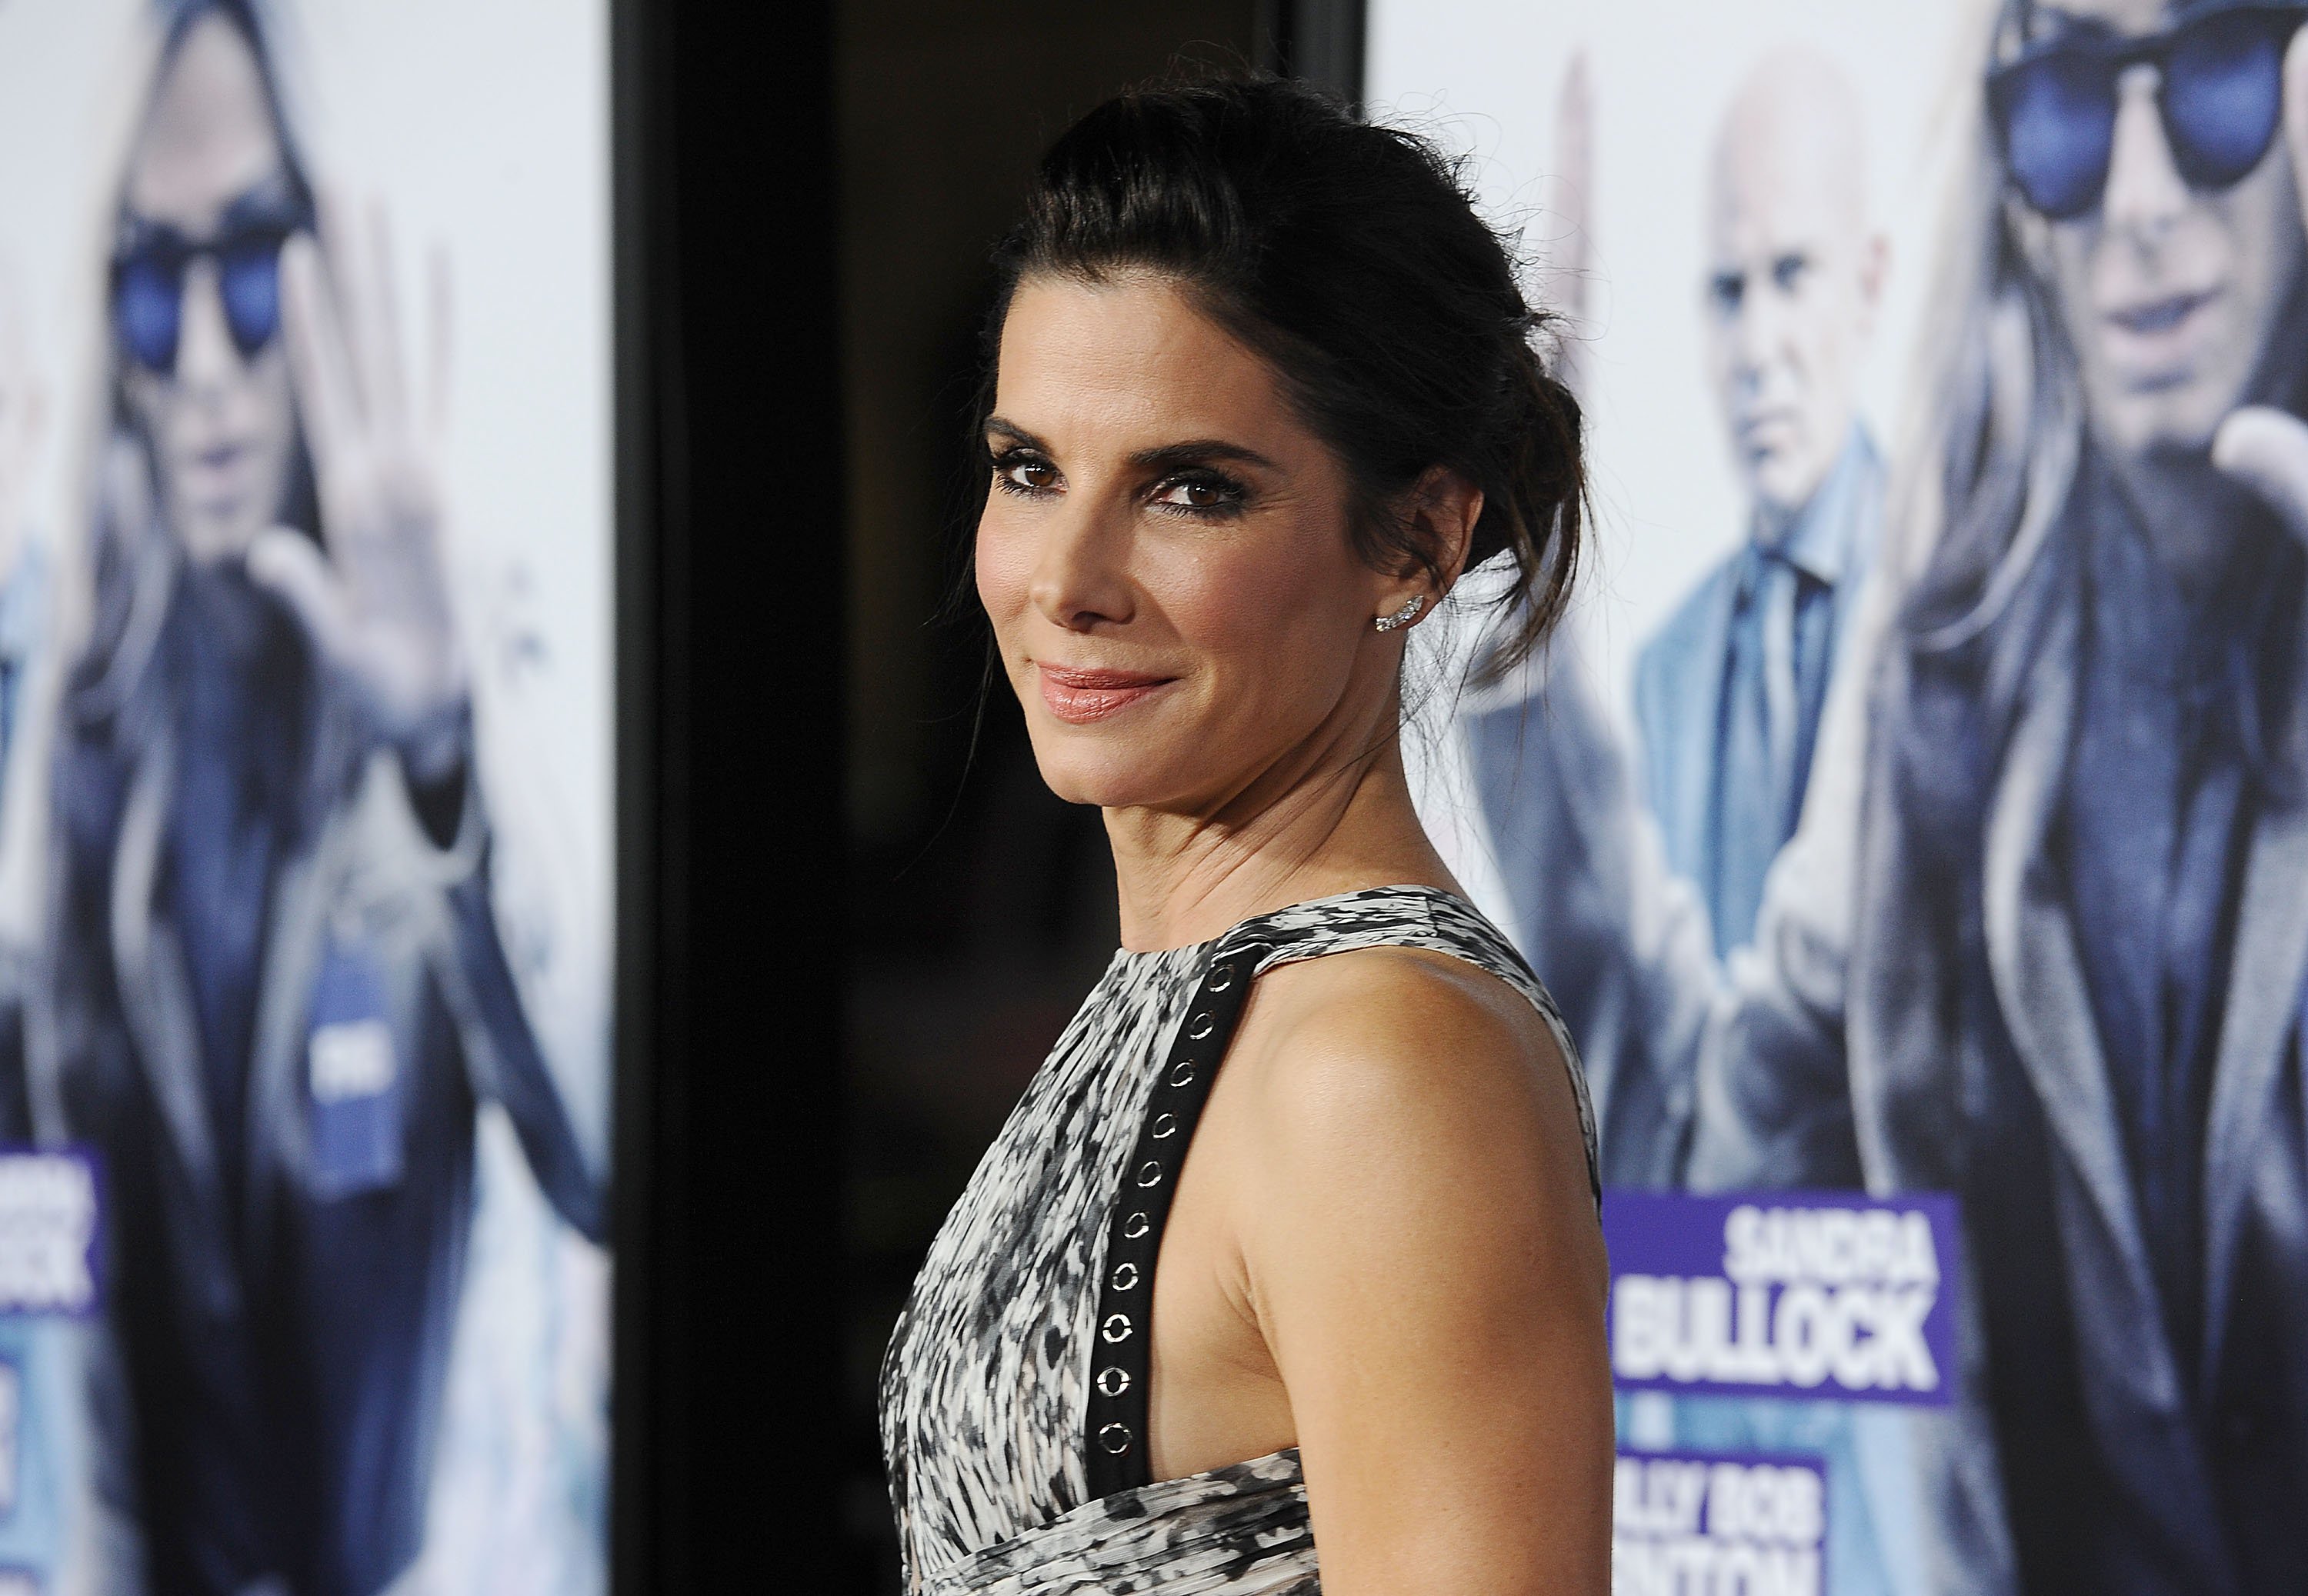 Sandra Bullock at the premiere of "Our Brand Is Crisis" on October 26, 2015 | Source: Getty Images